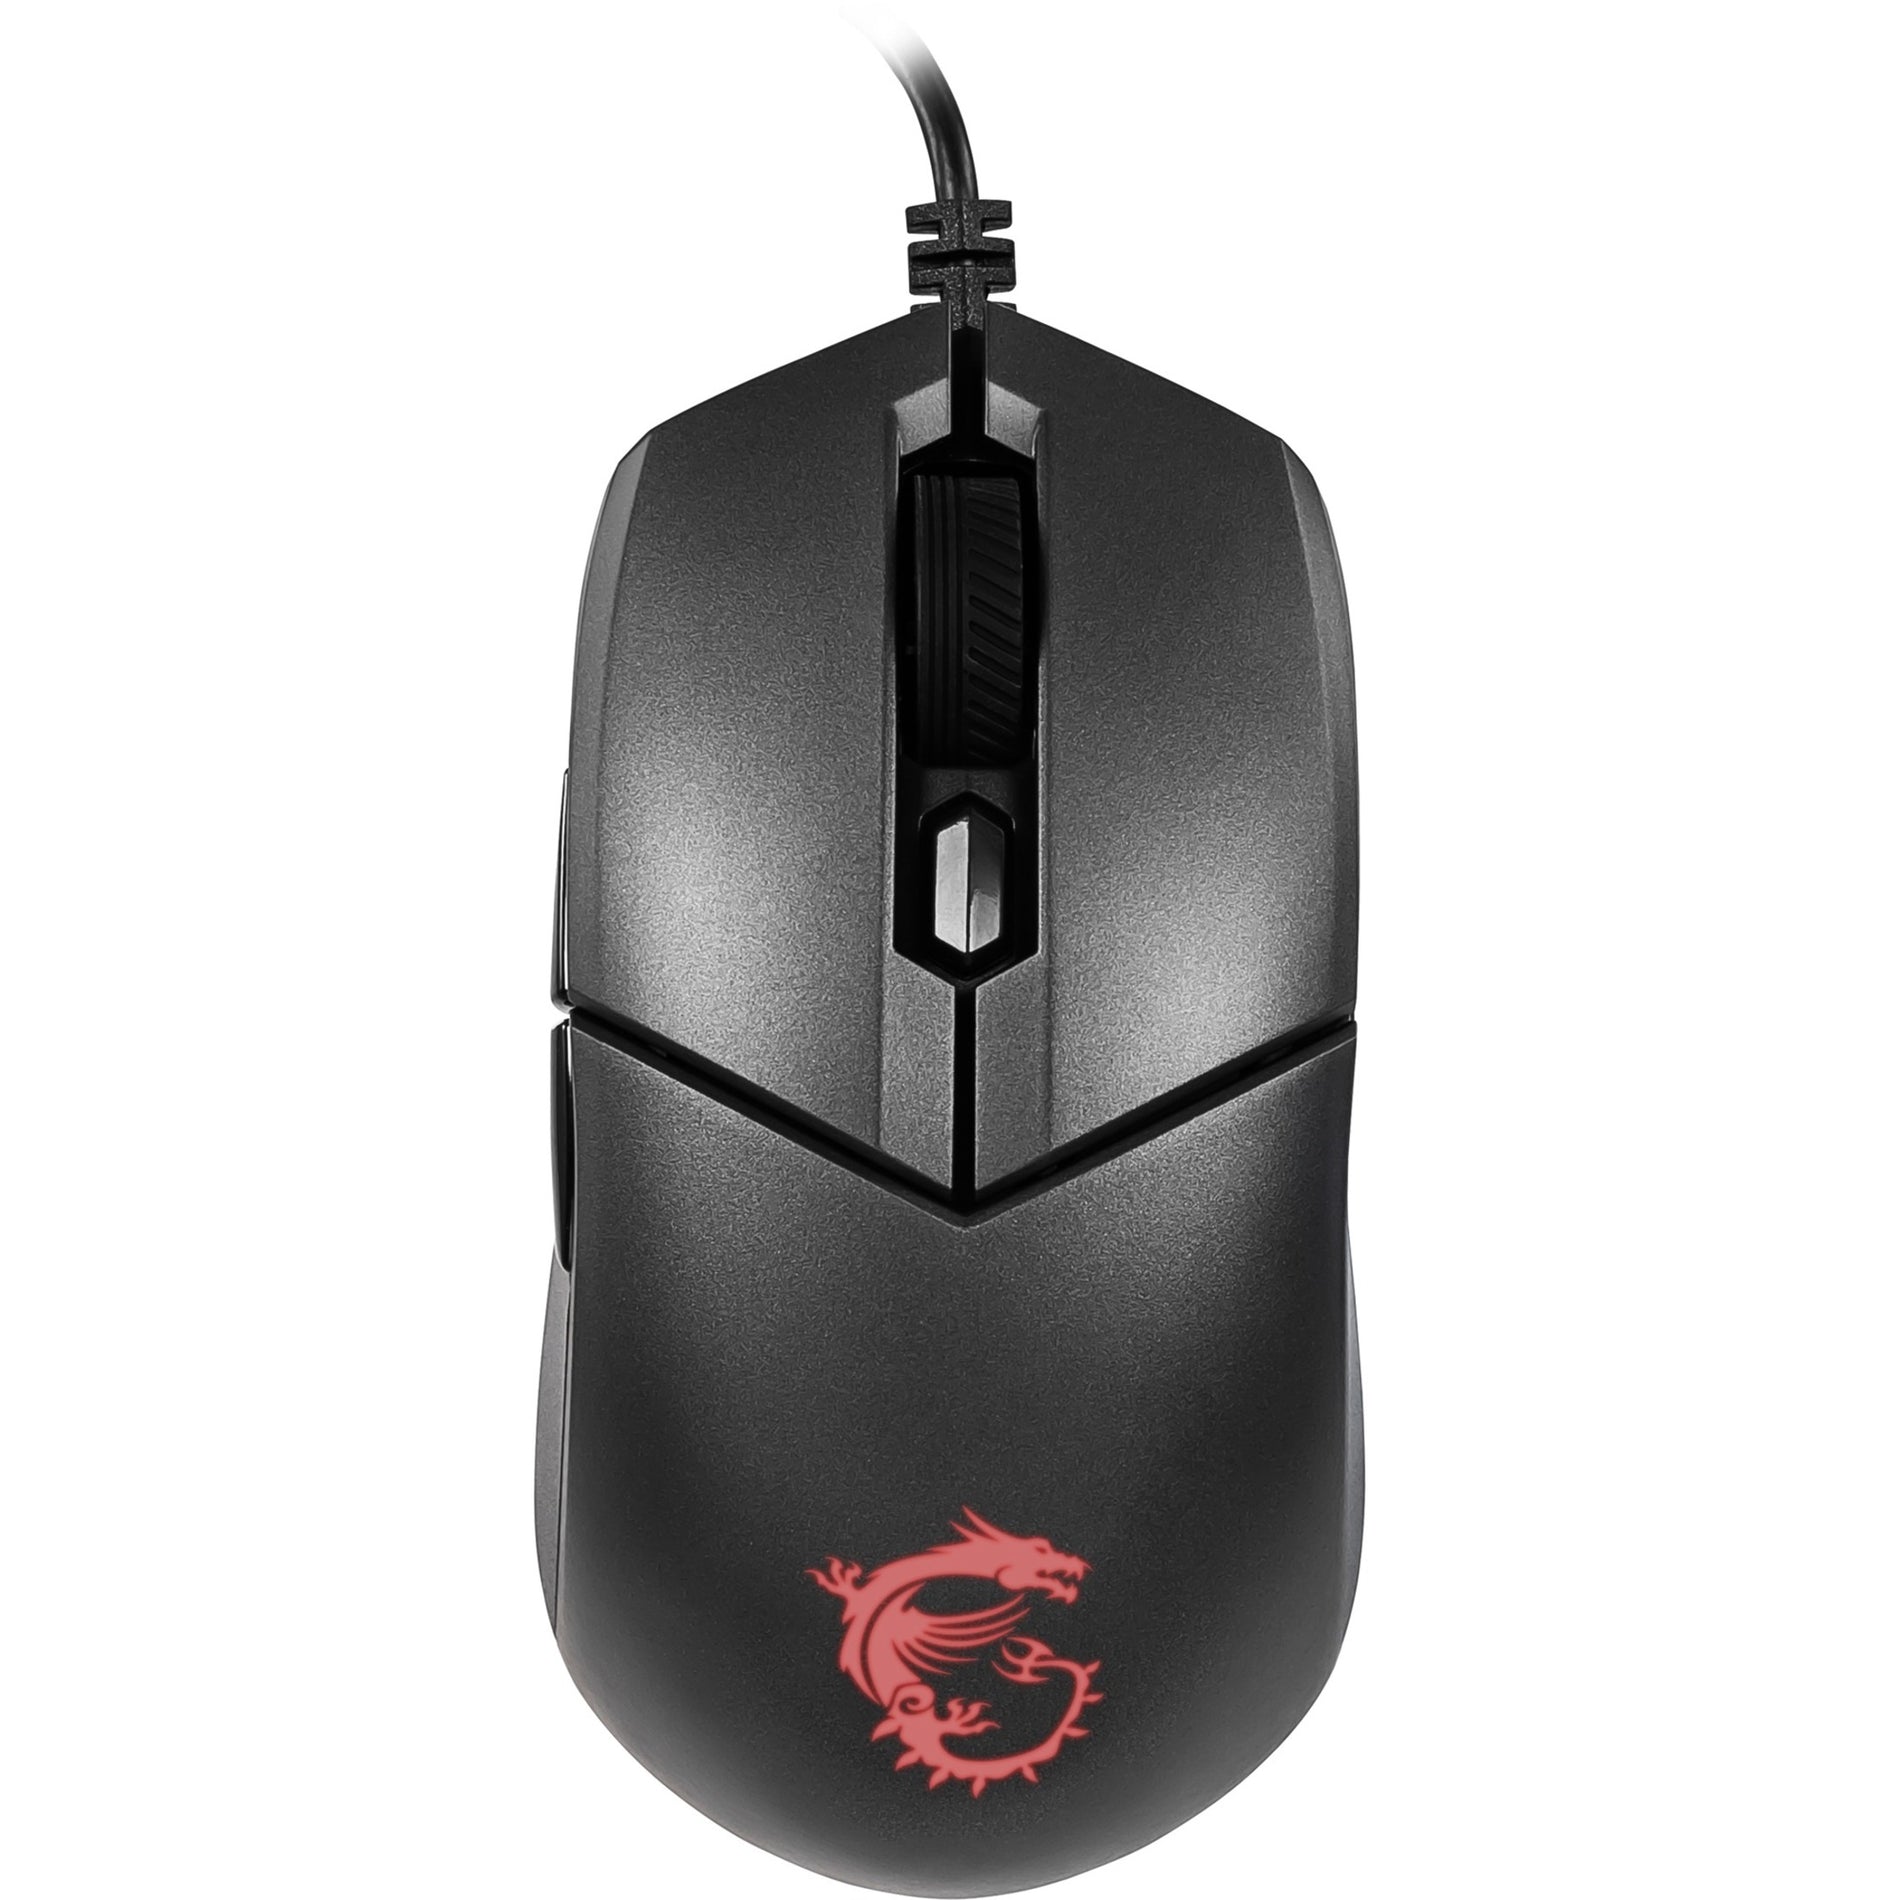 MSI CLUTCH GM11 Gaming Mouse, Ergonomic Fit, 5000 DPI, 6 Buttons, USB 2.0